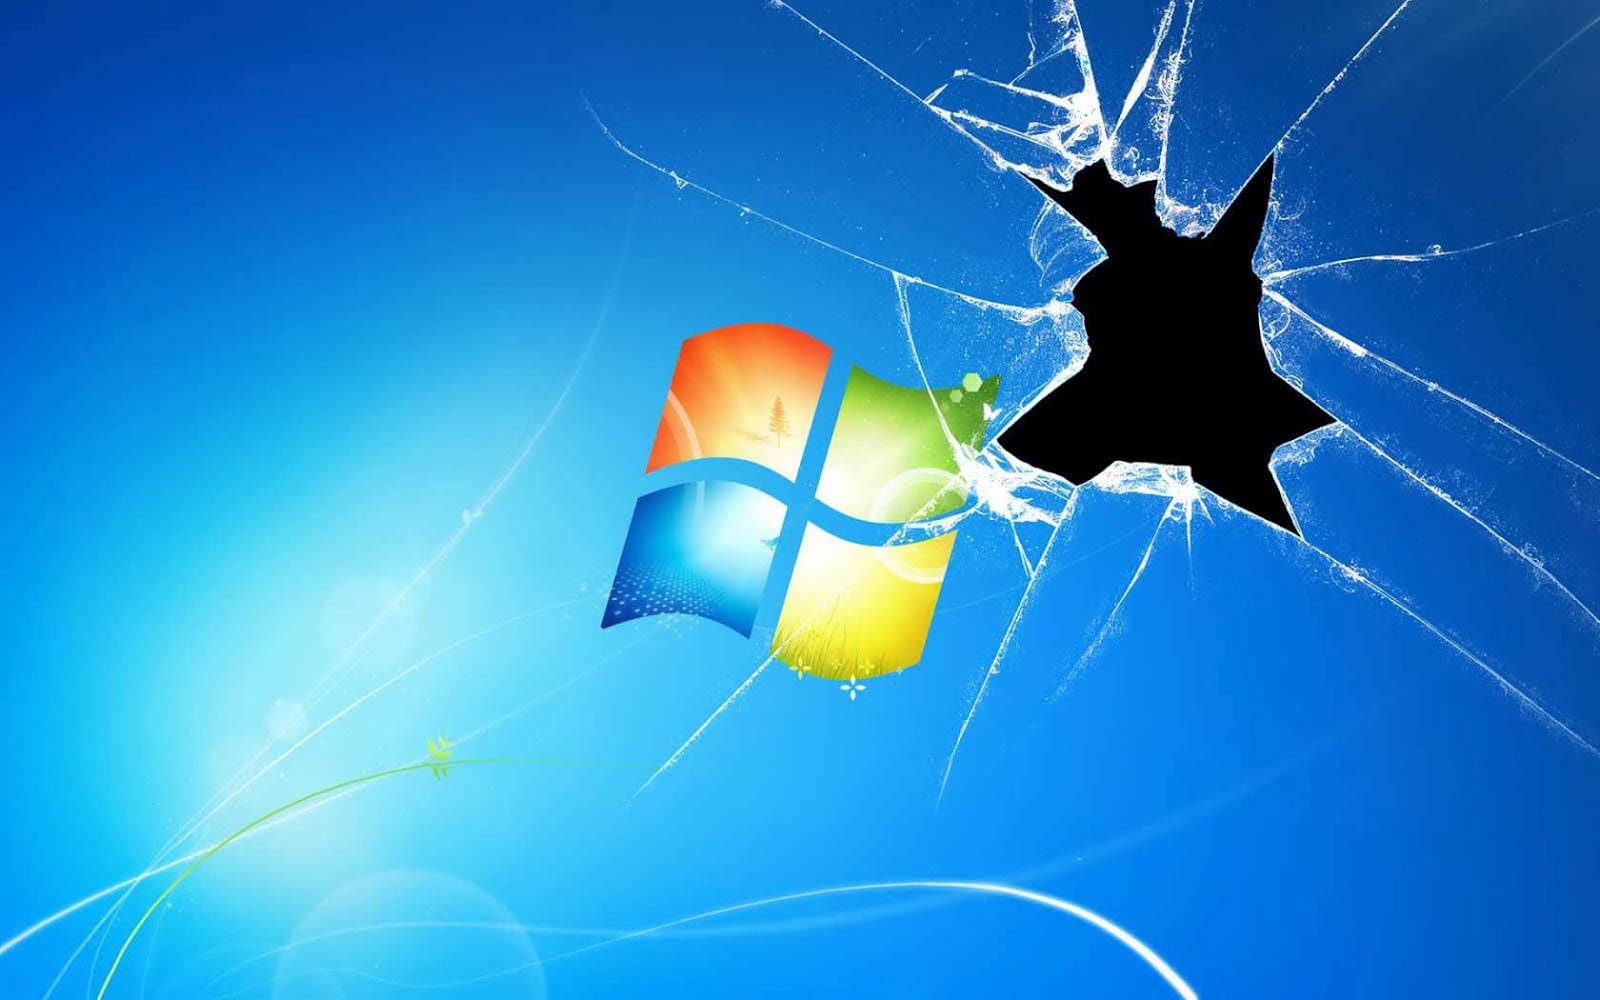 Tag Windows Broken Glass Wallpaper Image Photos Pictures And